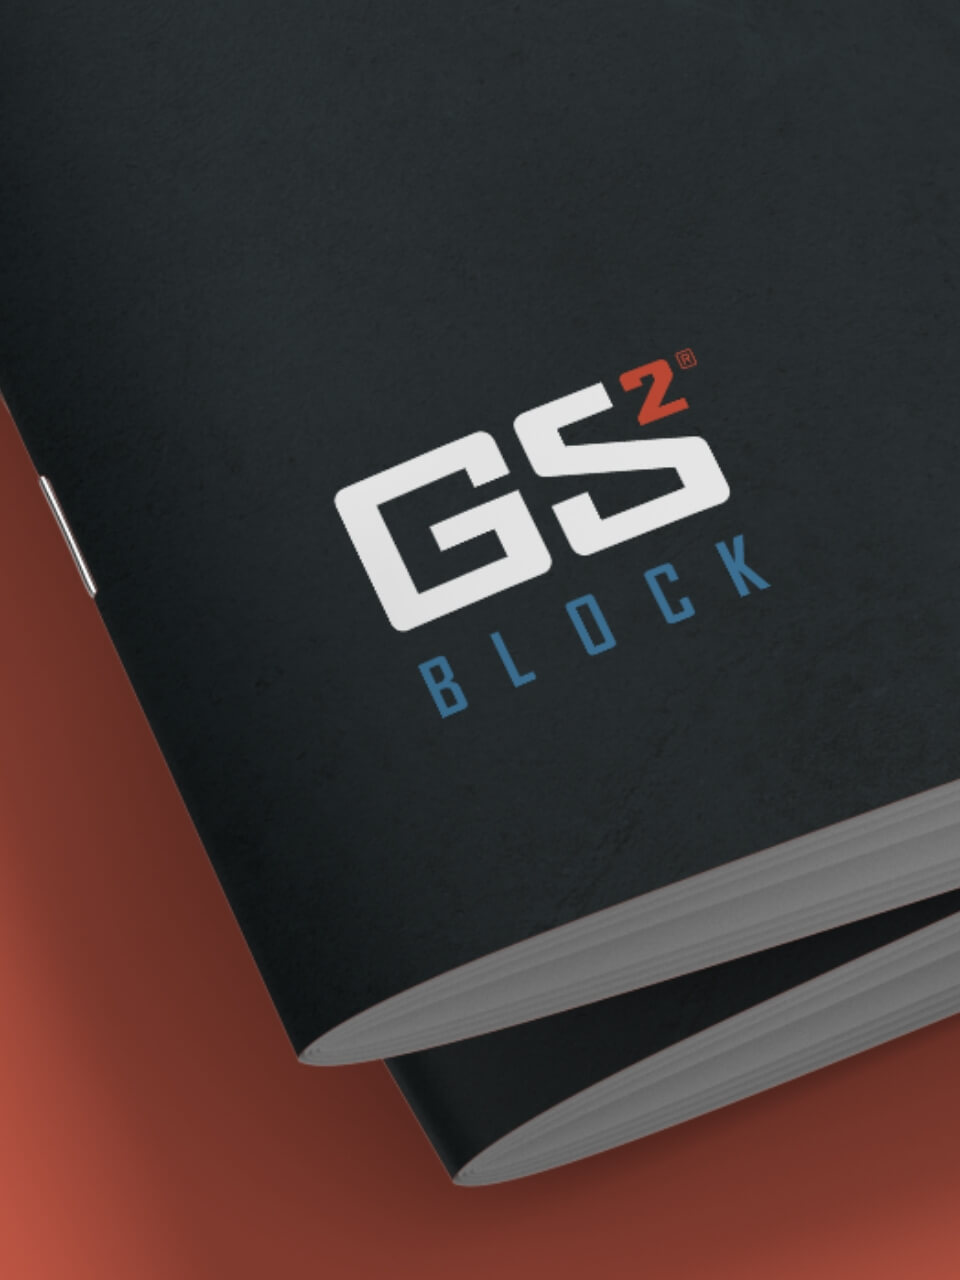 GS2 Block logo on booklet